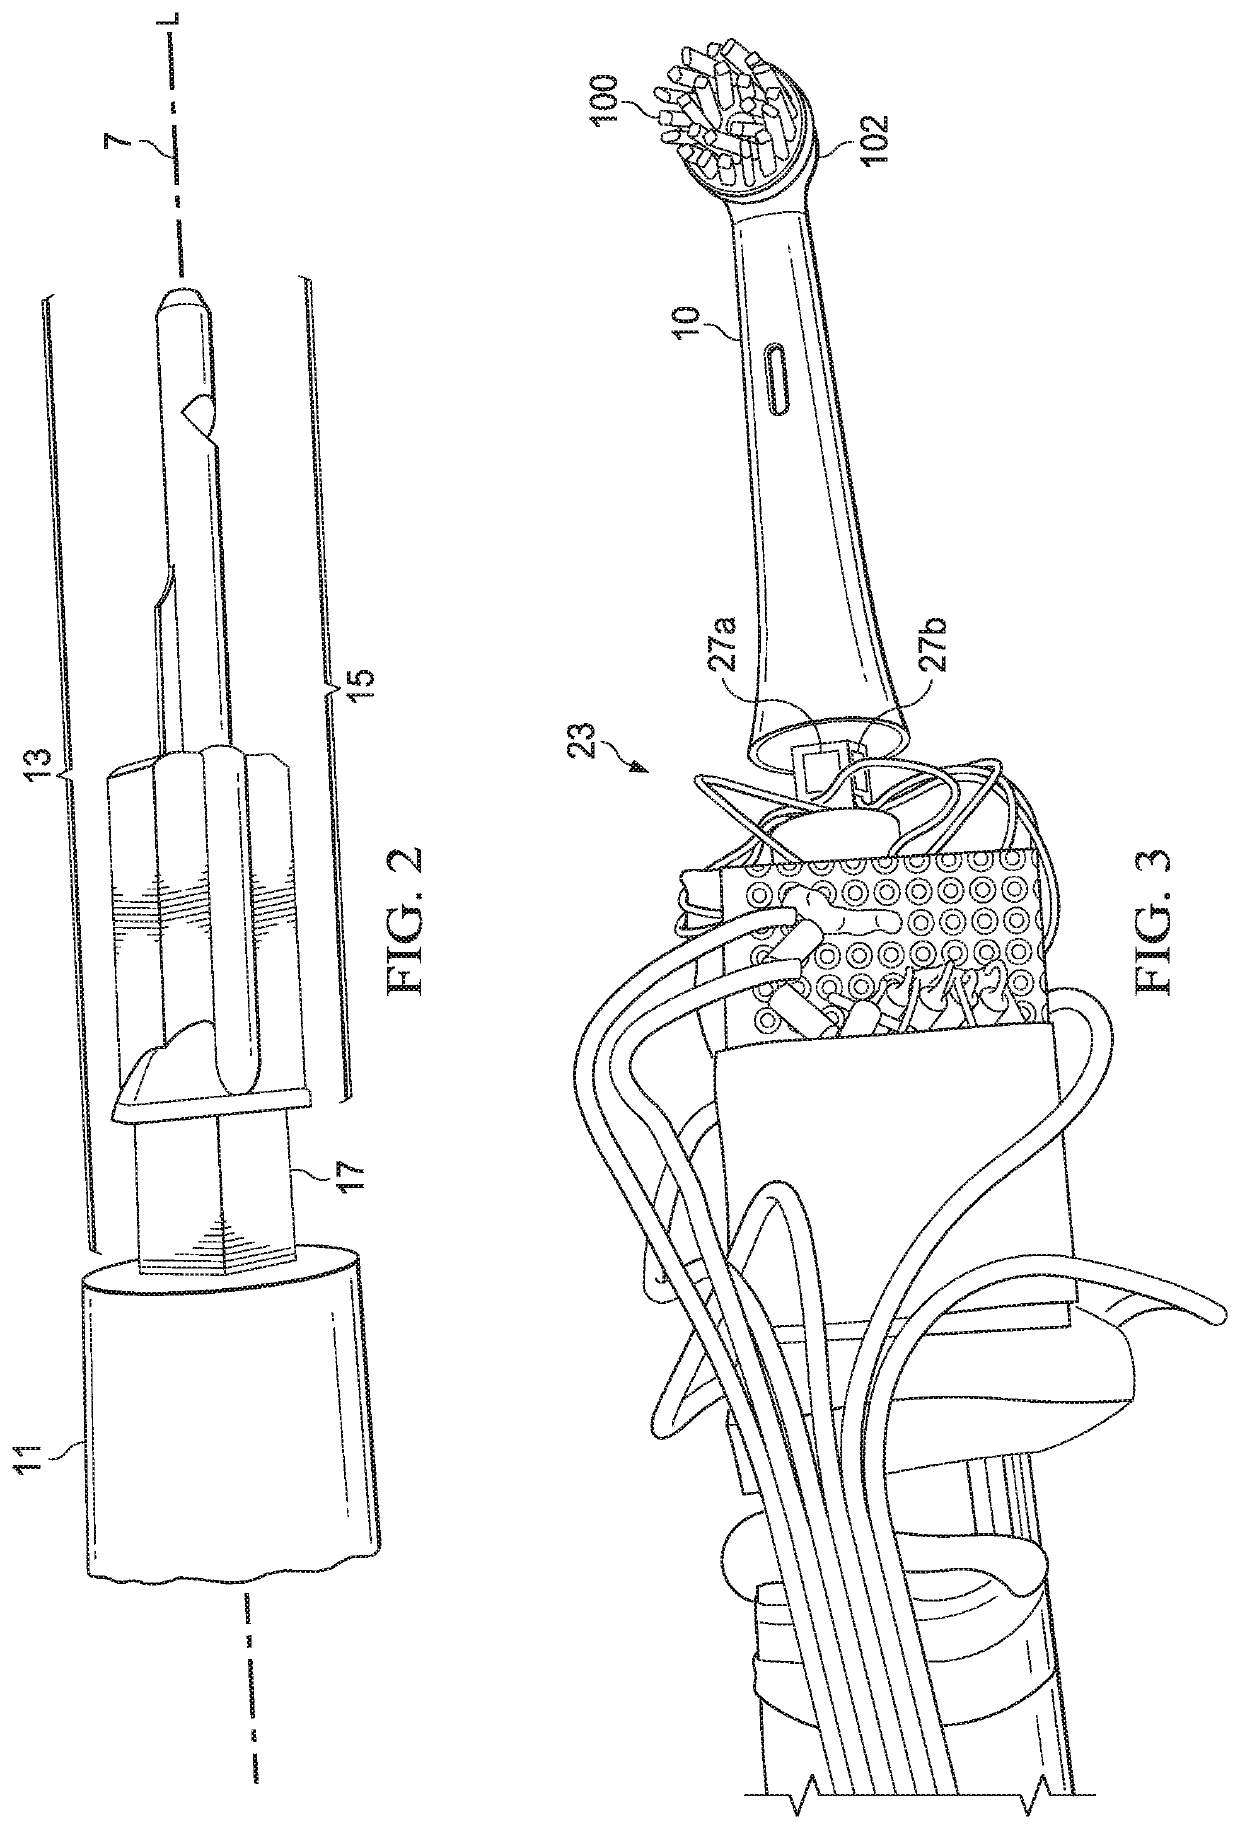 Toothbrush for oral cavity position detection